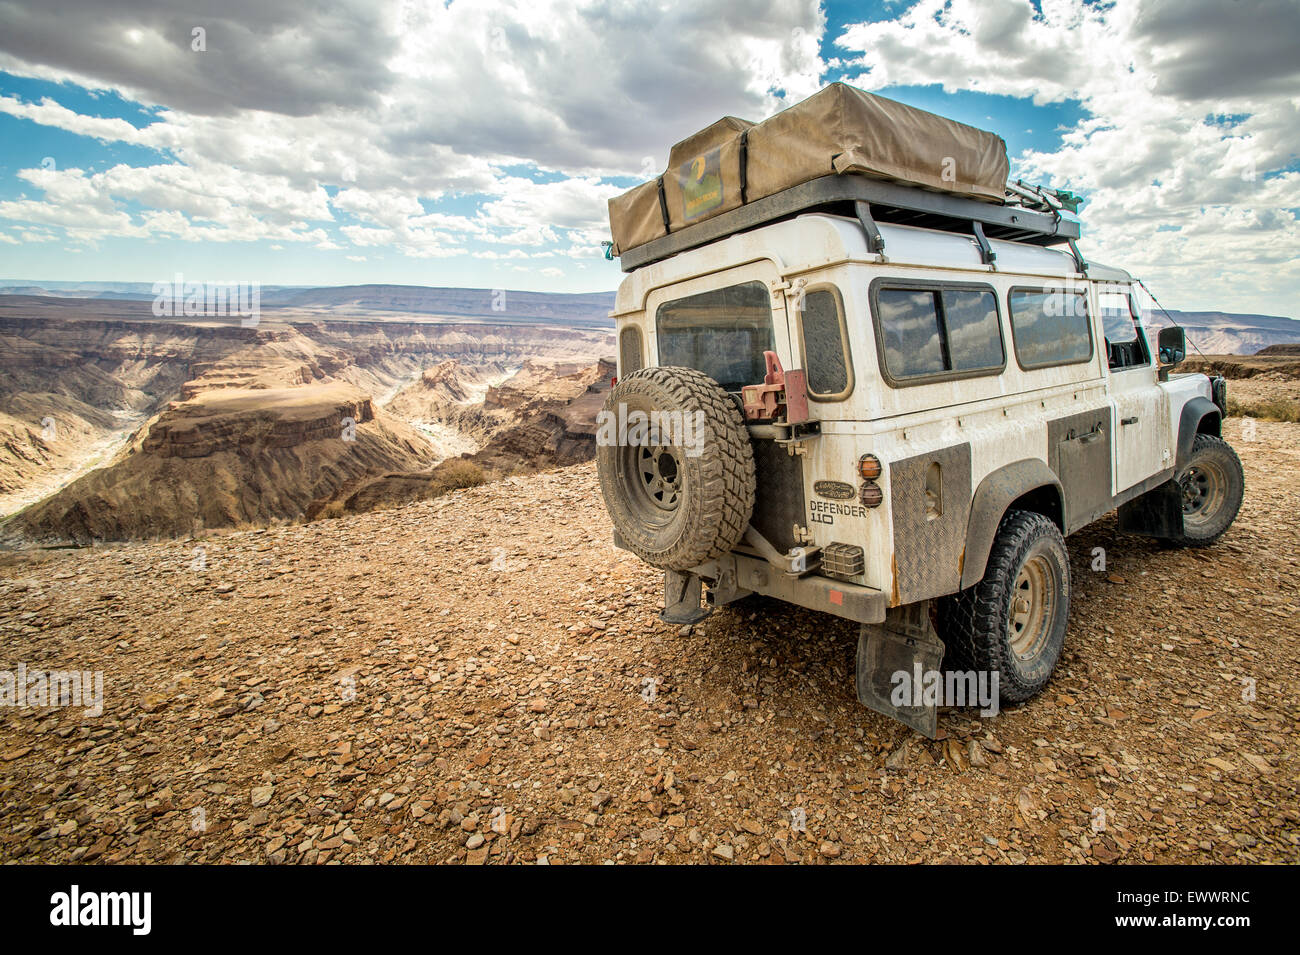 Namibia, Africa - Land Rover parked next to the Fish River Canyon Stock Photo